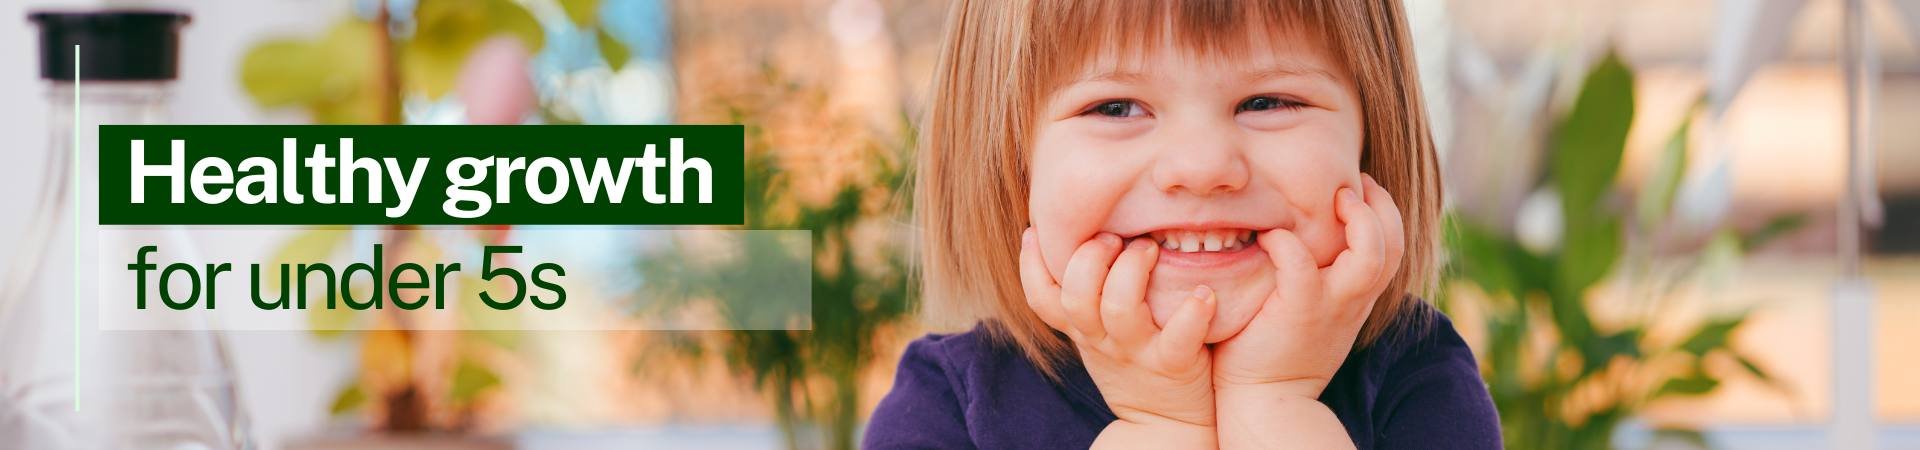 Banner Healthy growth under 5s. image of smiling 3 year old child